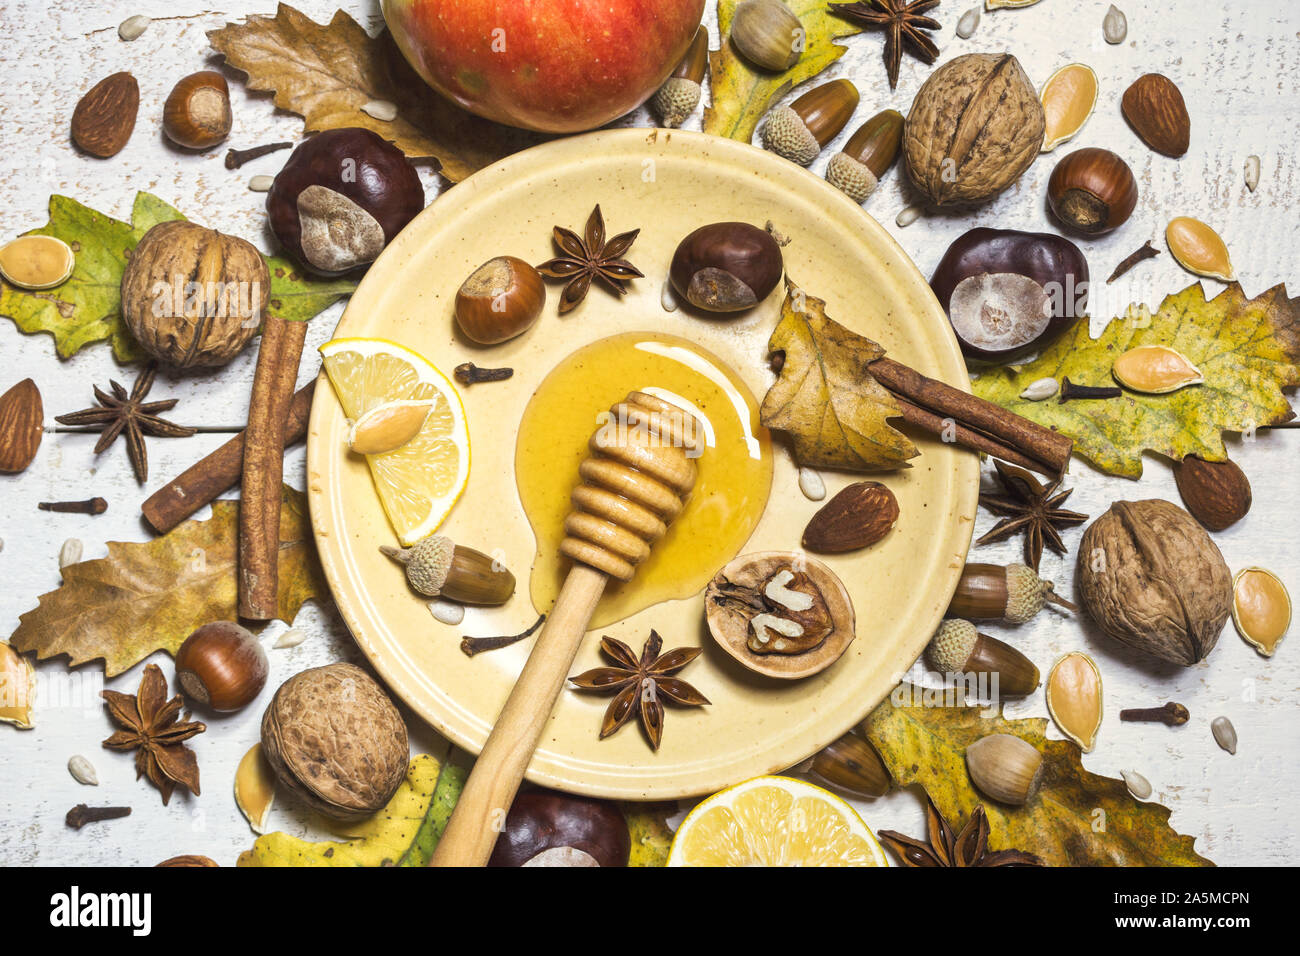 Autumn composition with nuts, honey, seeds, spices, acorns, chestnuts, fruits and autumn leaves. Top view, flat lay. Stock Photo